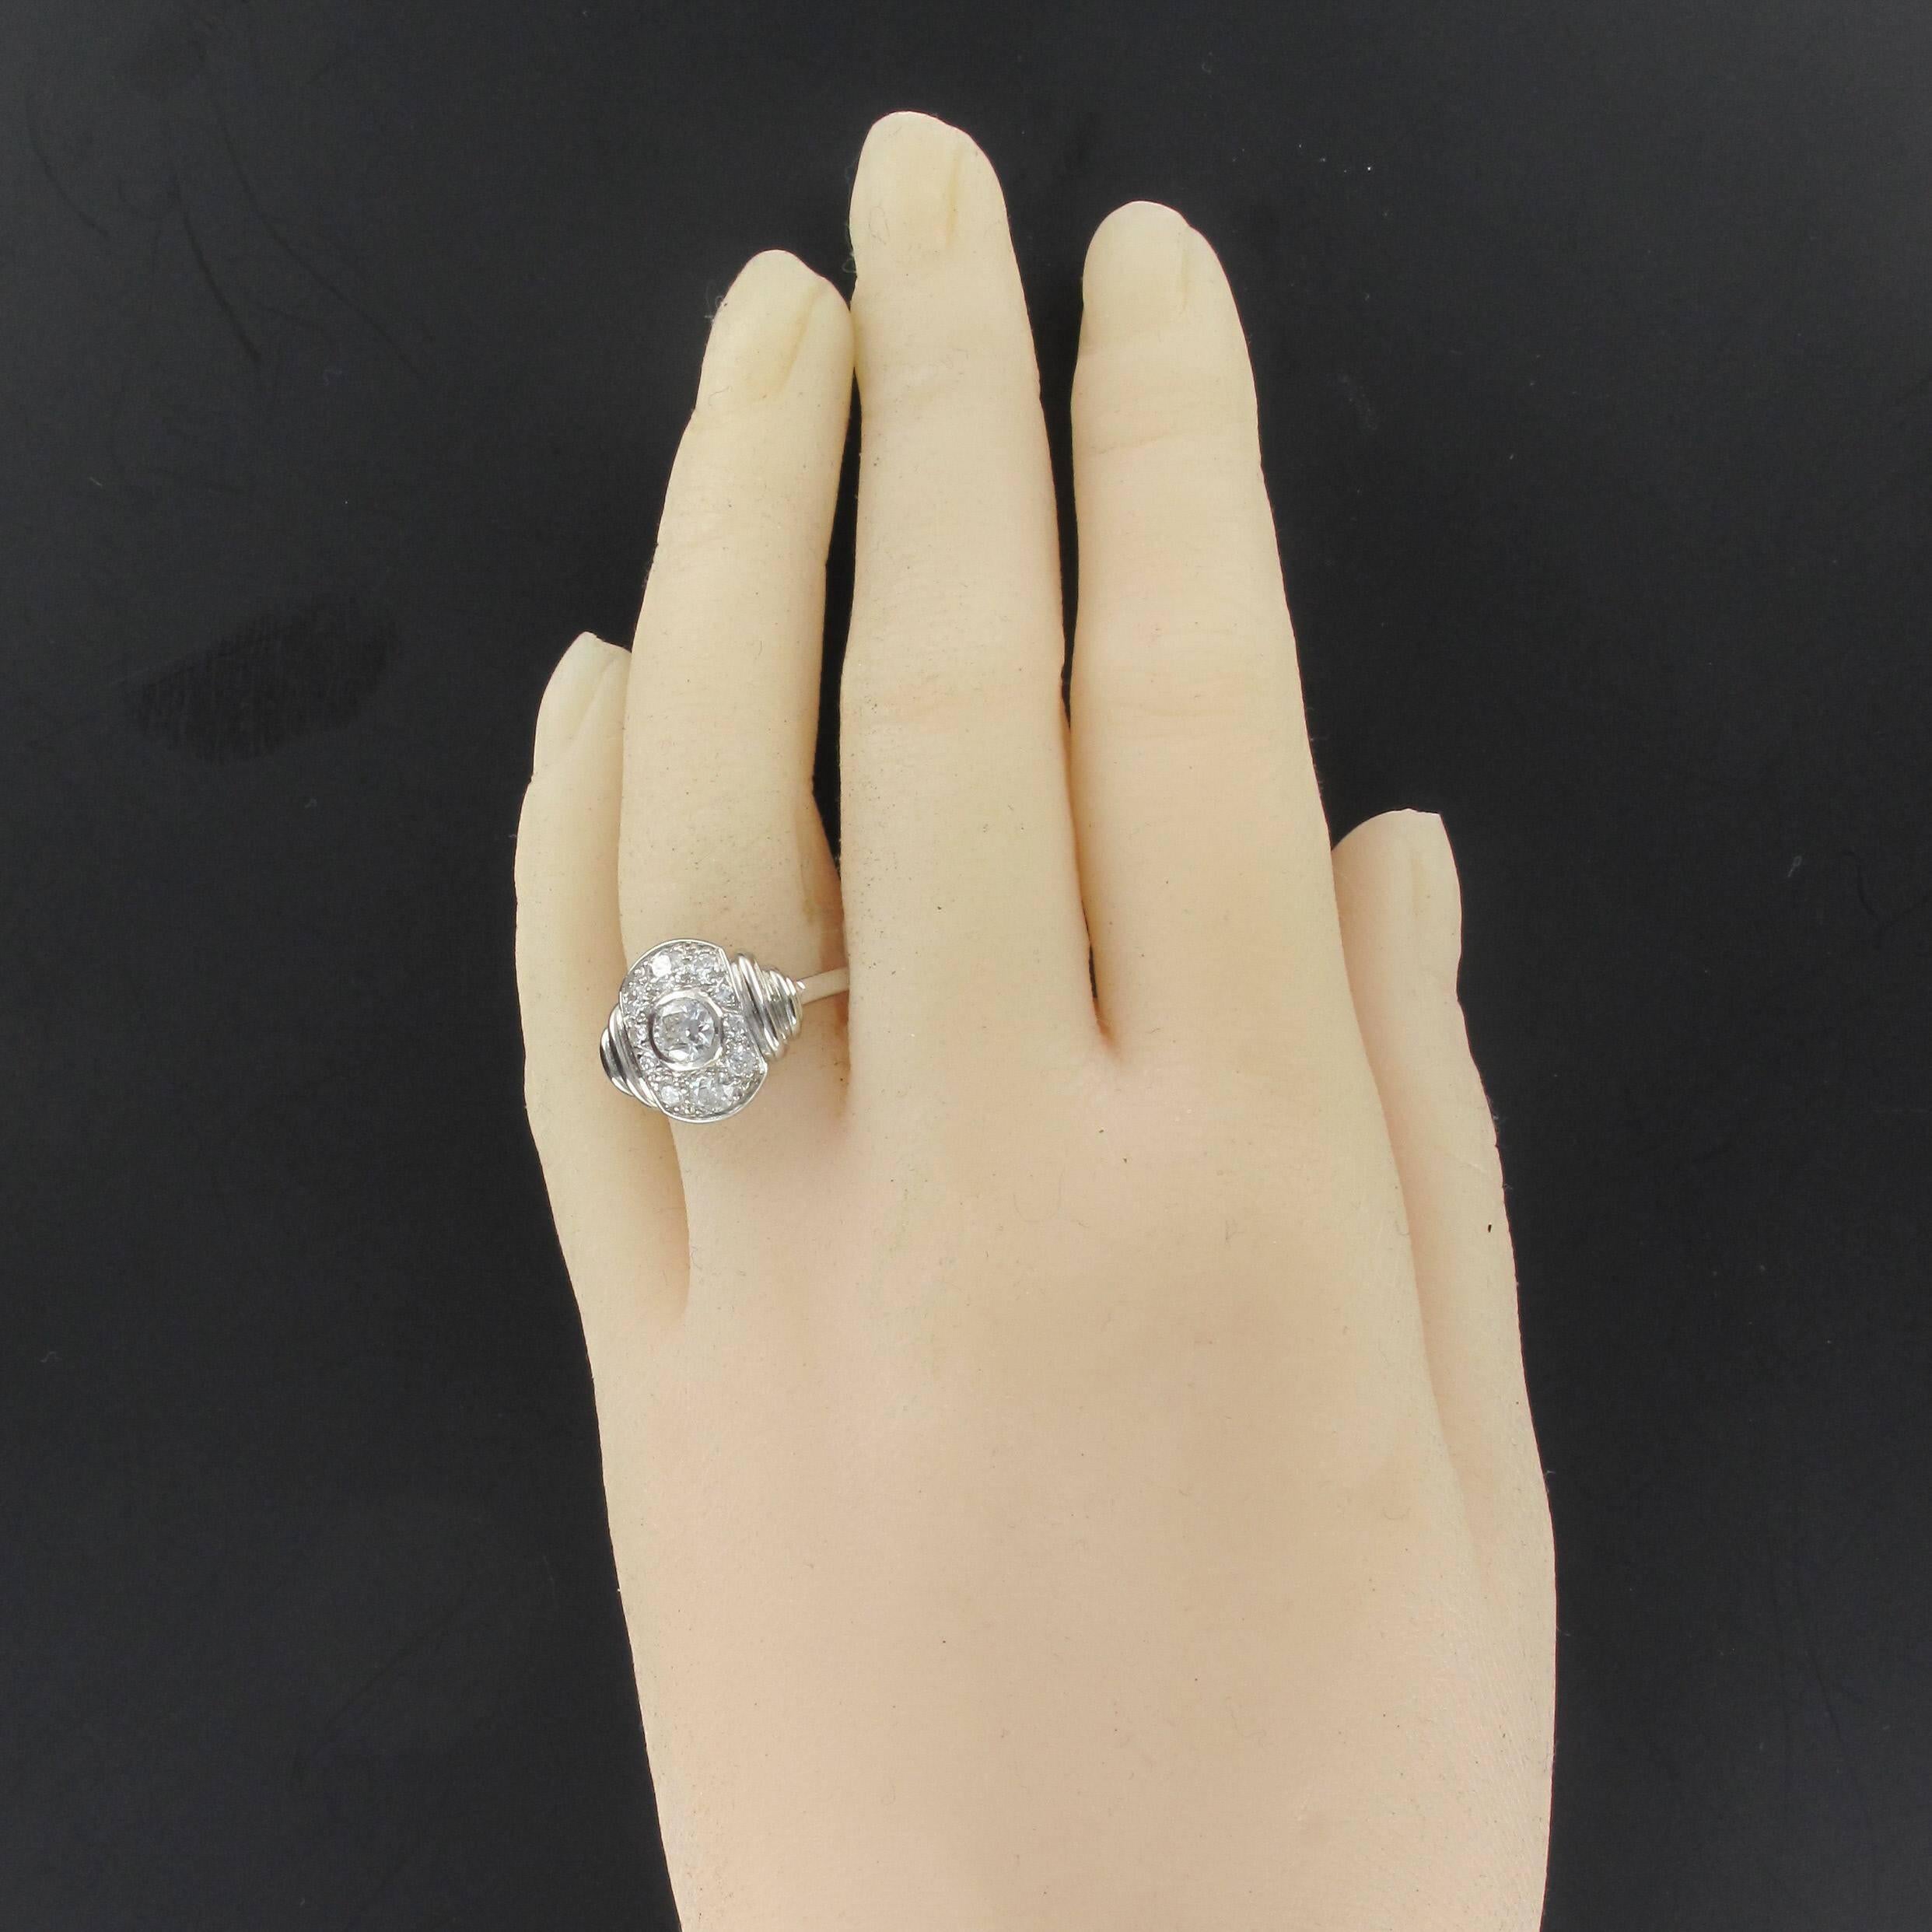 Ring in 18K white gold and platinum.

A splendid oval Art Deco ring set with an antique cut diamond surrounded by numerous small antique cut diamonds. At each shoulder, gadrooning leads to the ring band. 

The center diamond weight: about 0.35